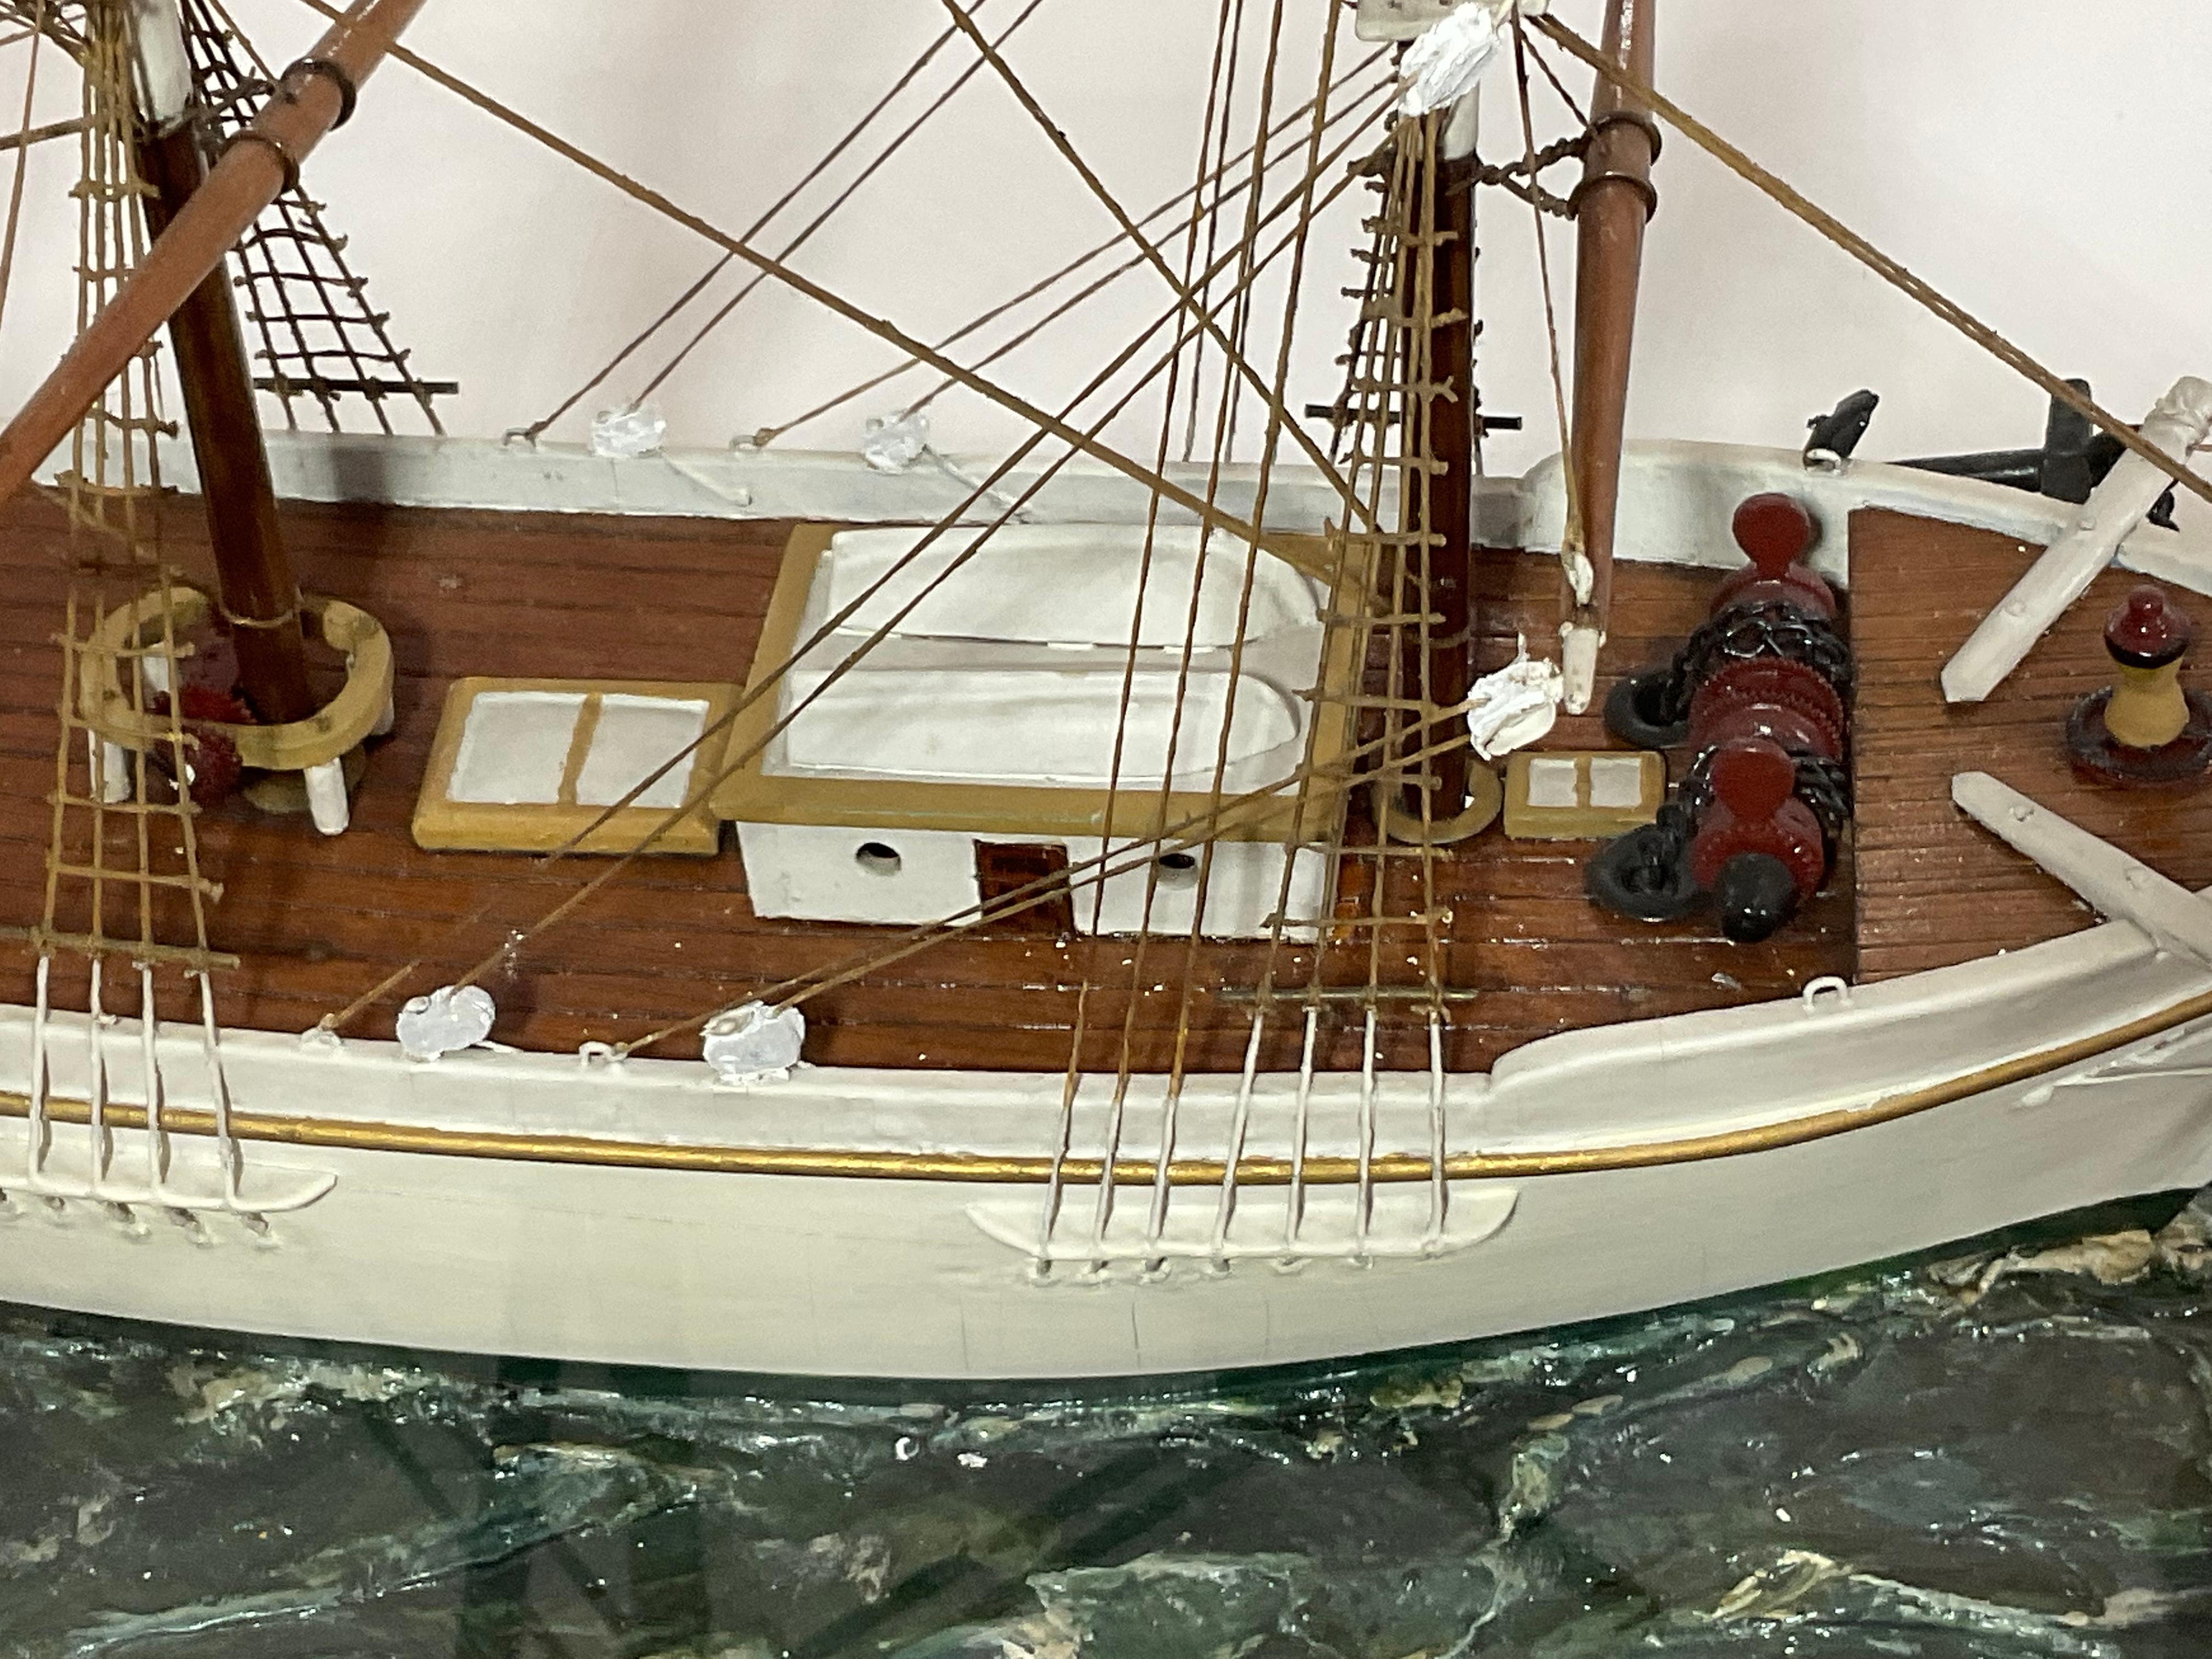 Small Wood Cased Ship Model 